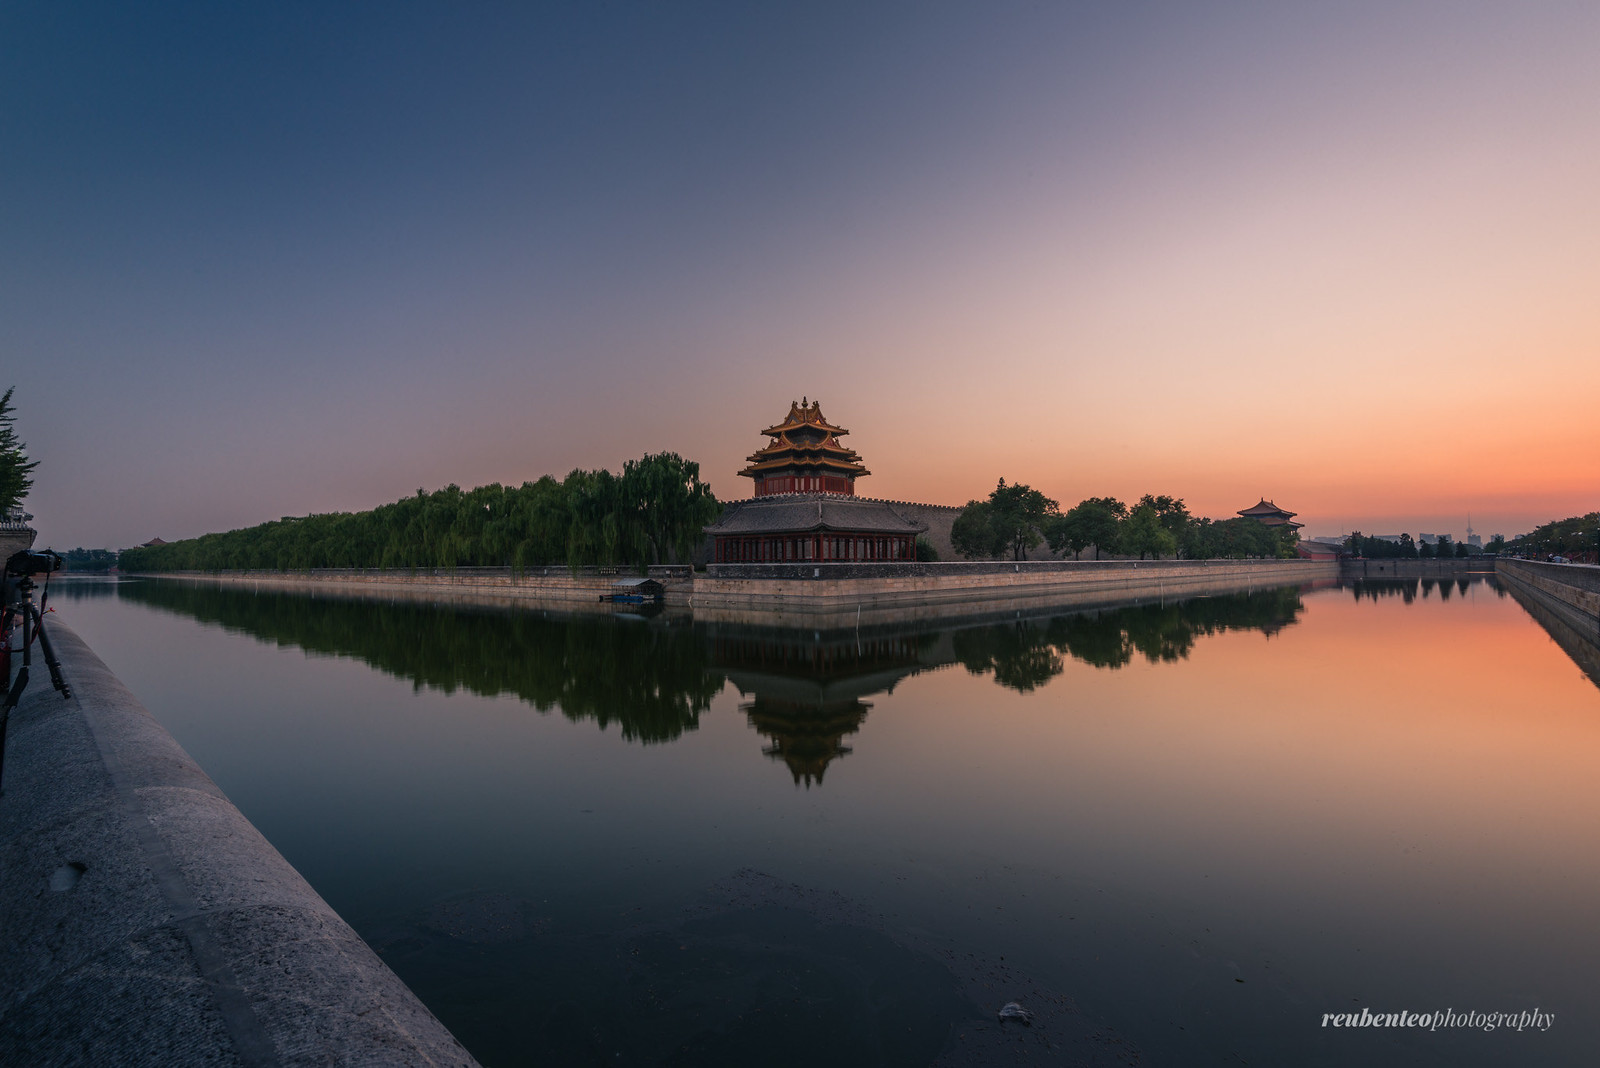 Sunset at the Corner Tower of the Forbidden City